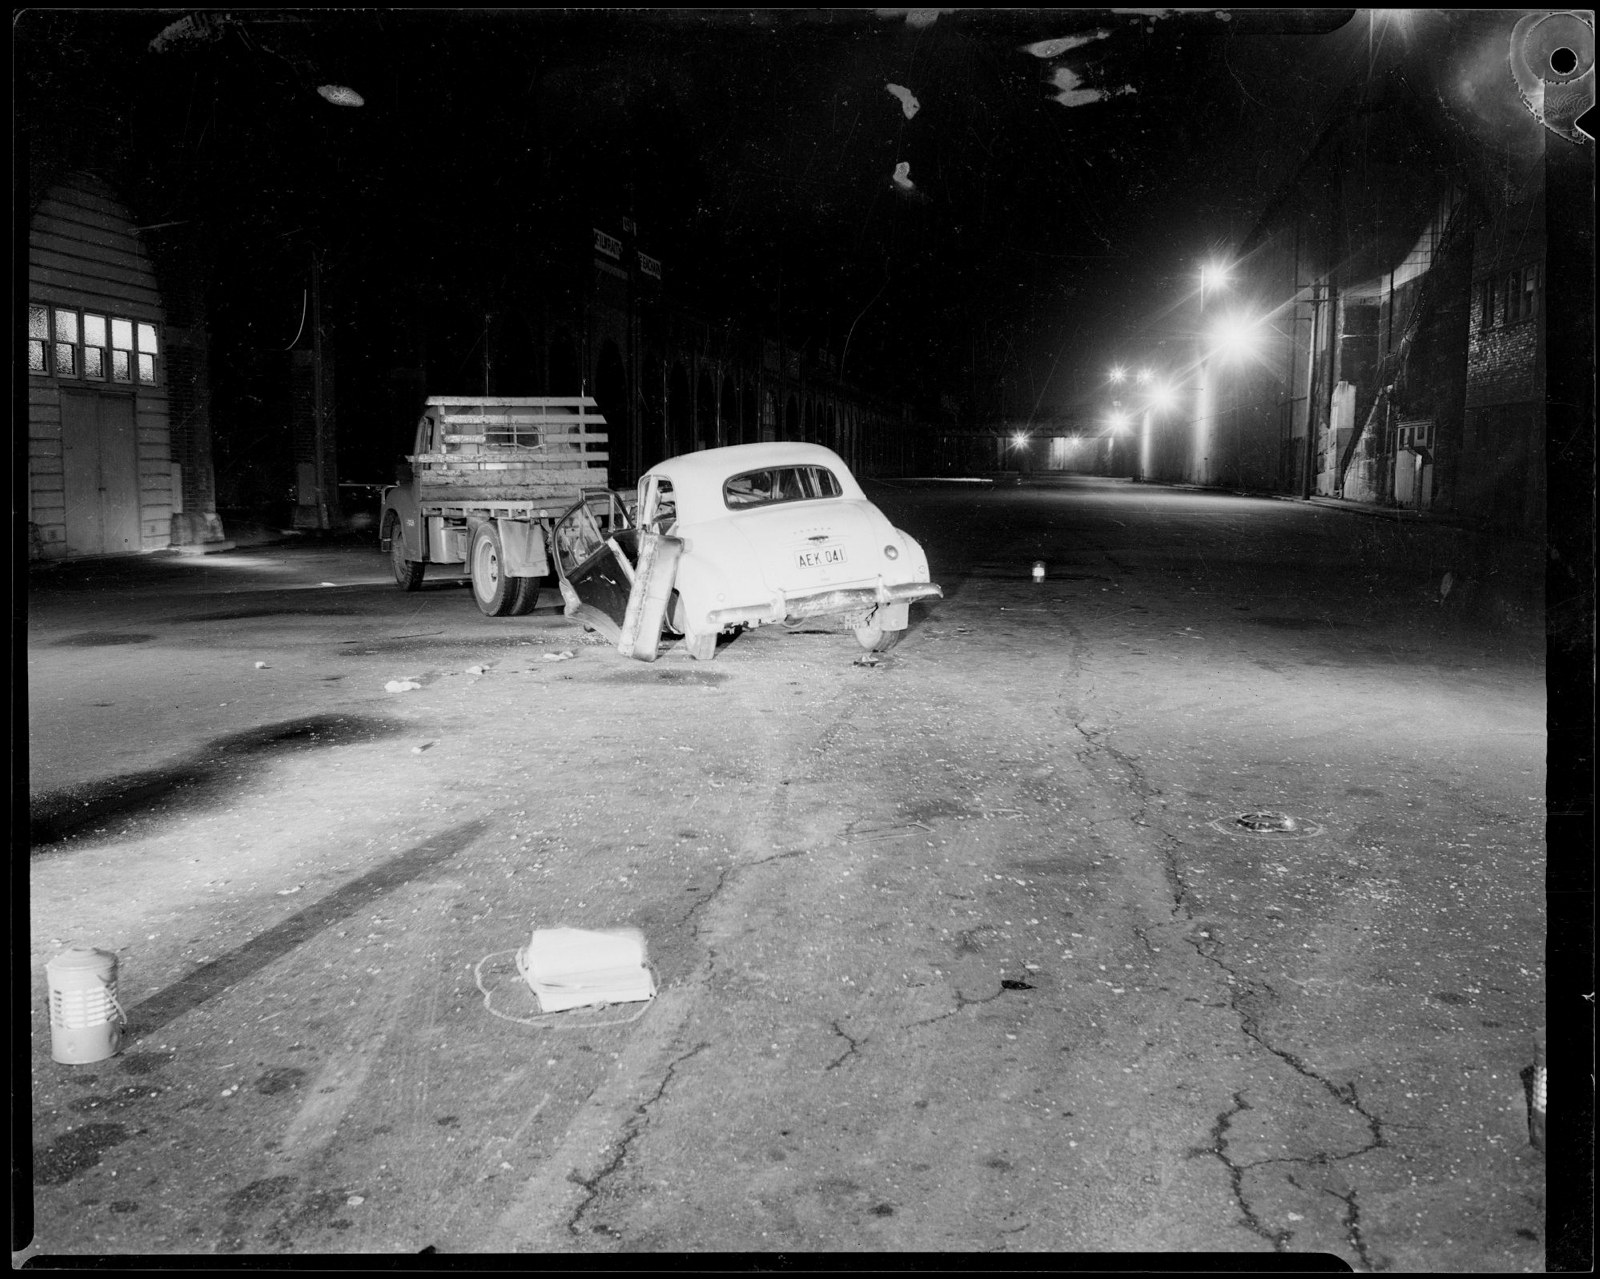 Night street scene showing damaged car collided with rear of utility truck with lanterns on road and book circled with chalk.